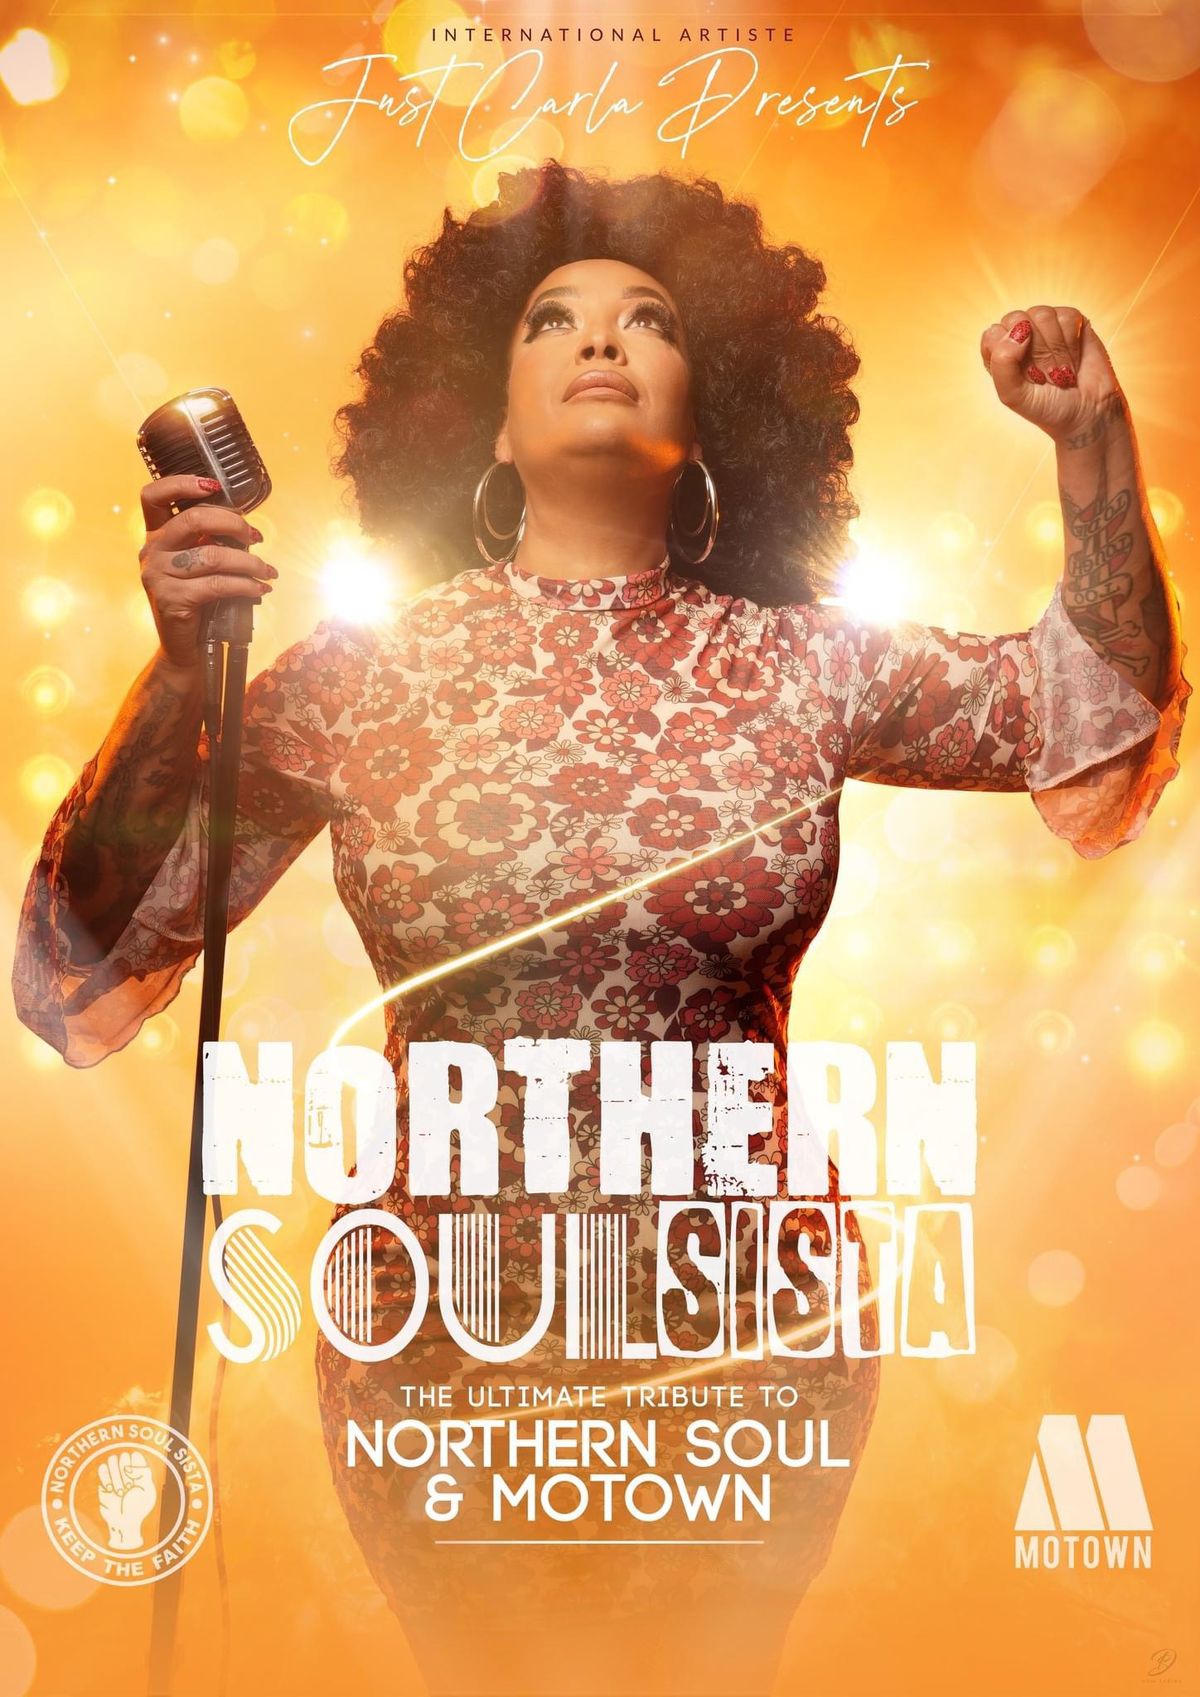 Northern Soul Sista Live @ The Telegraph 